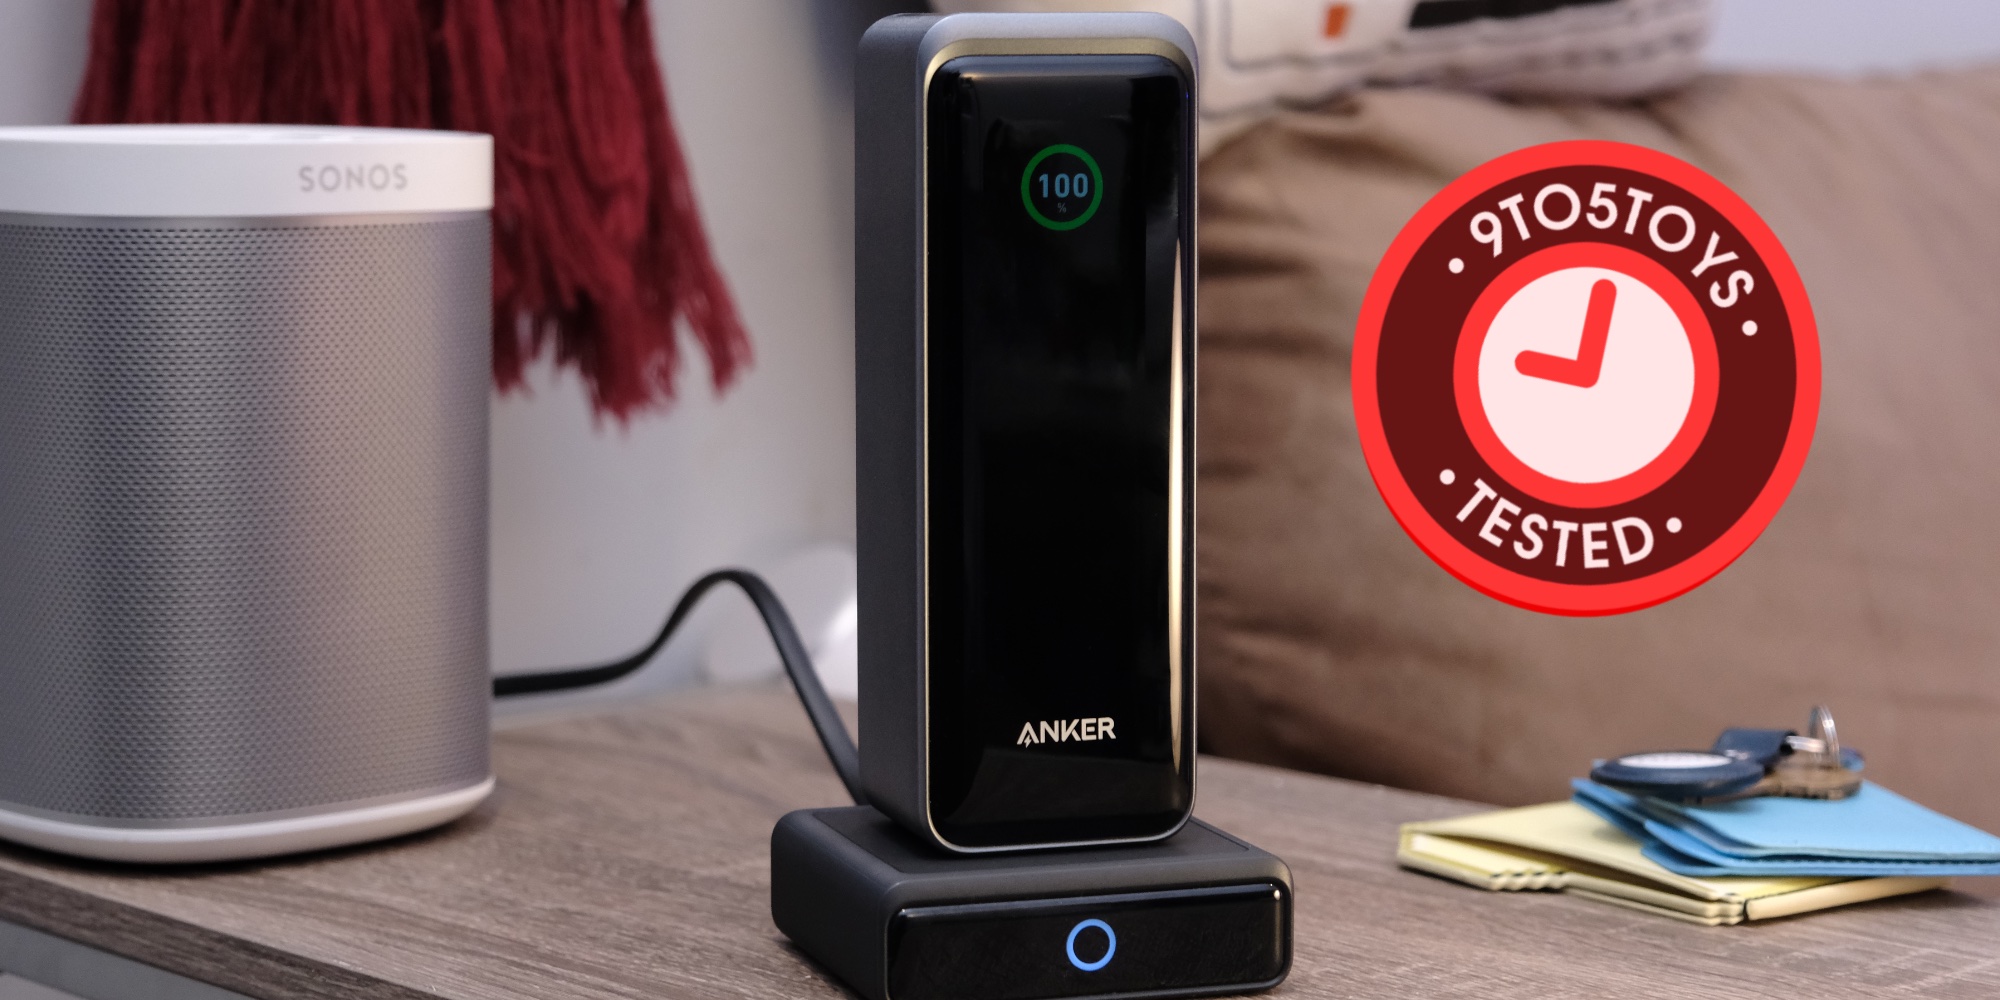 Anker Prime Power Bank review